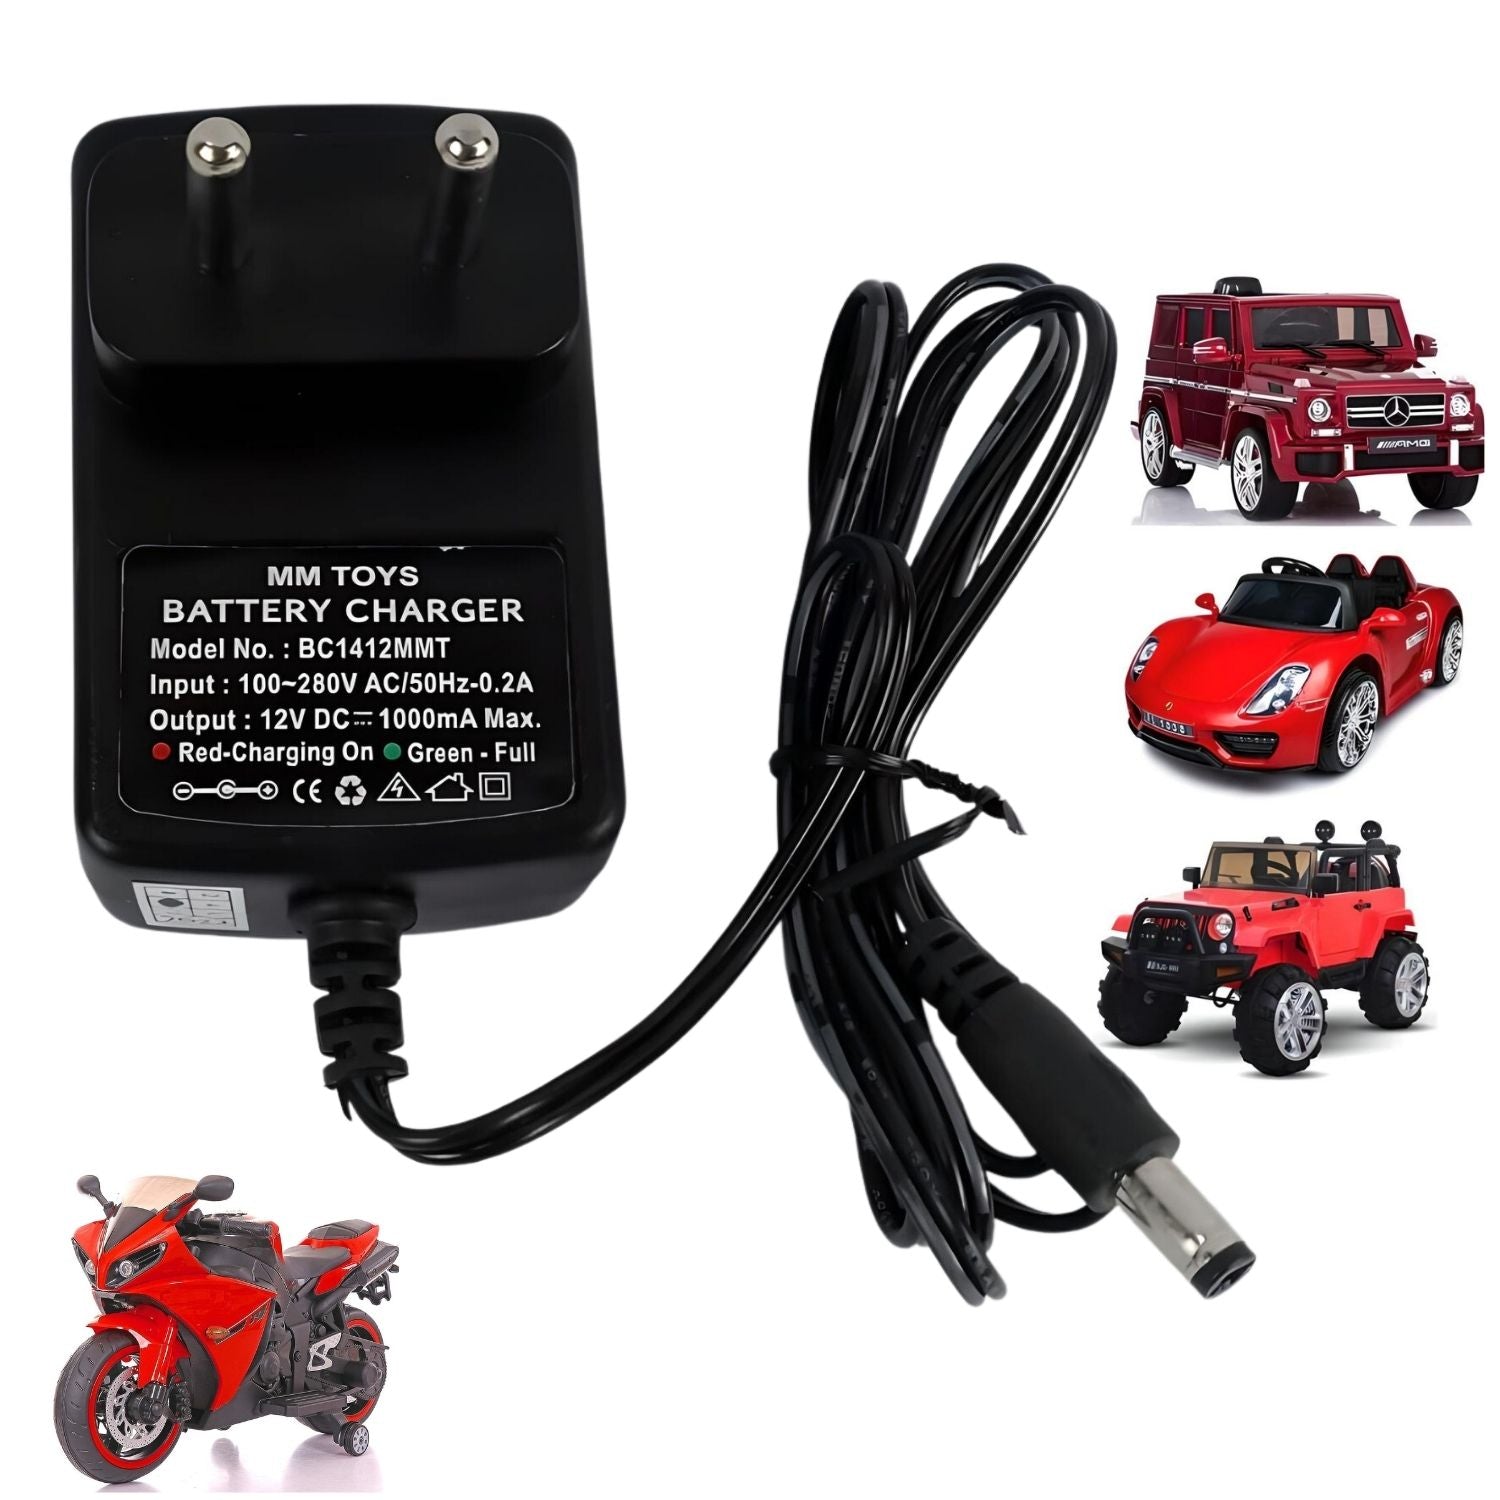 Dc 5v charger • Compare (39 products) see prices »